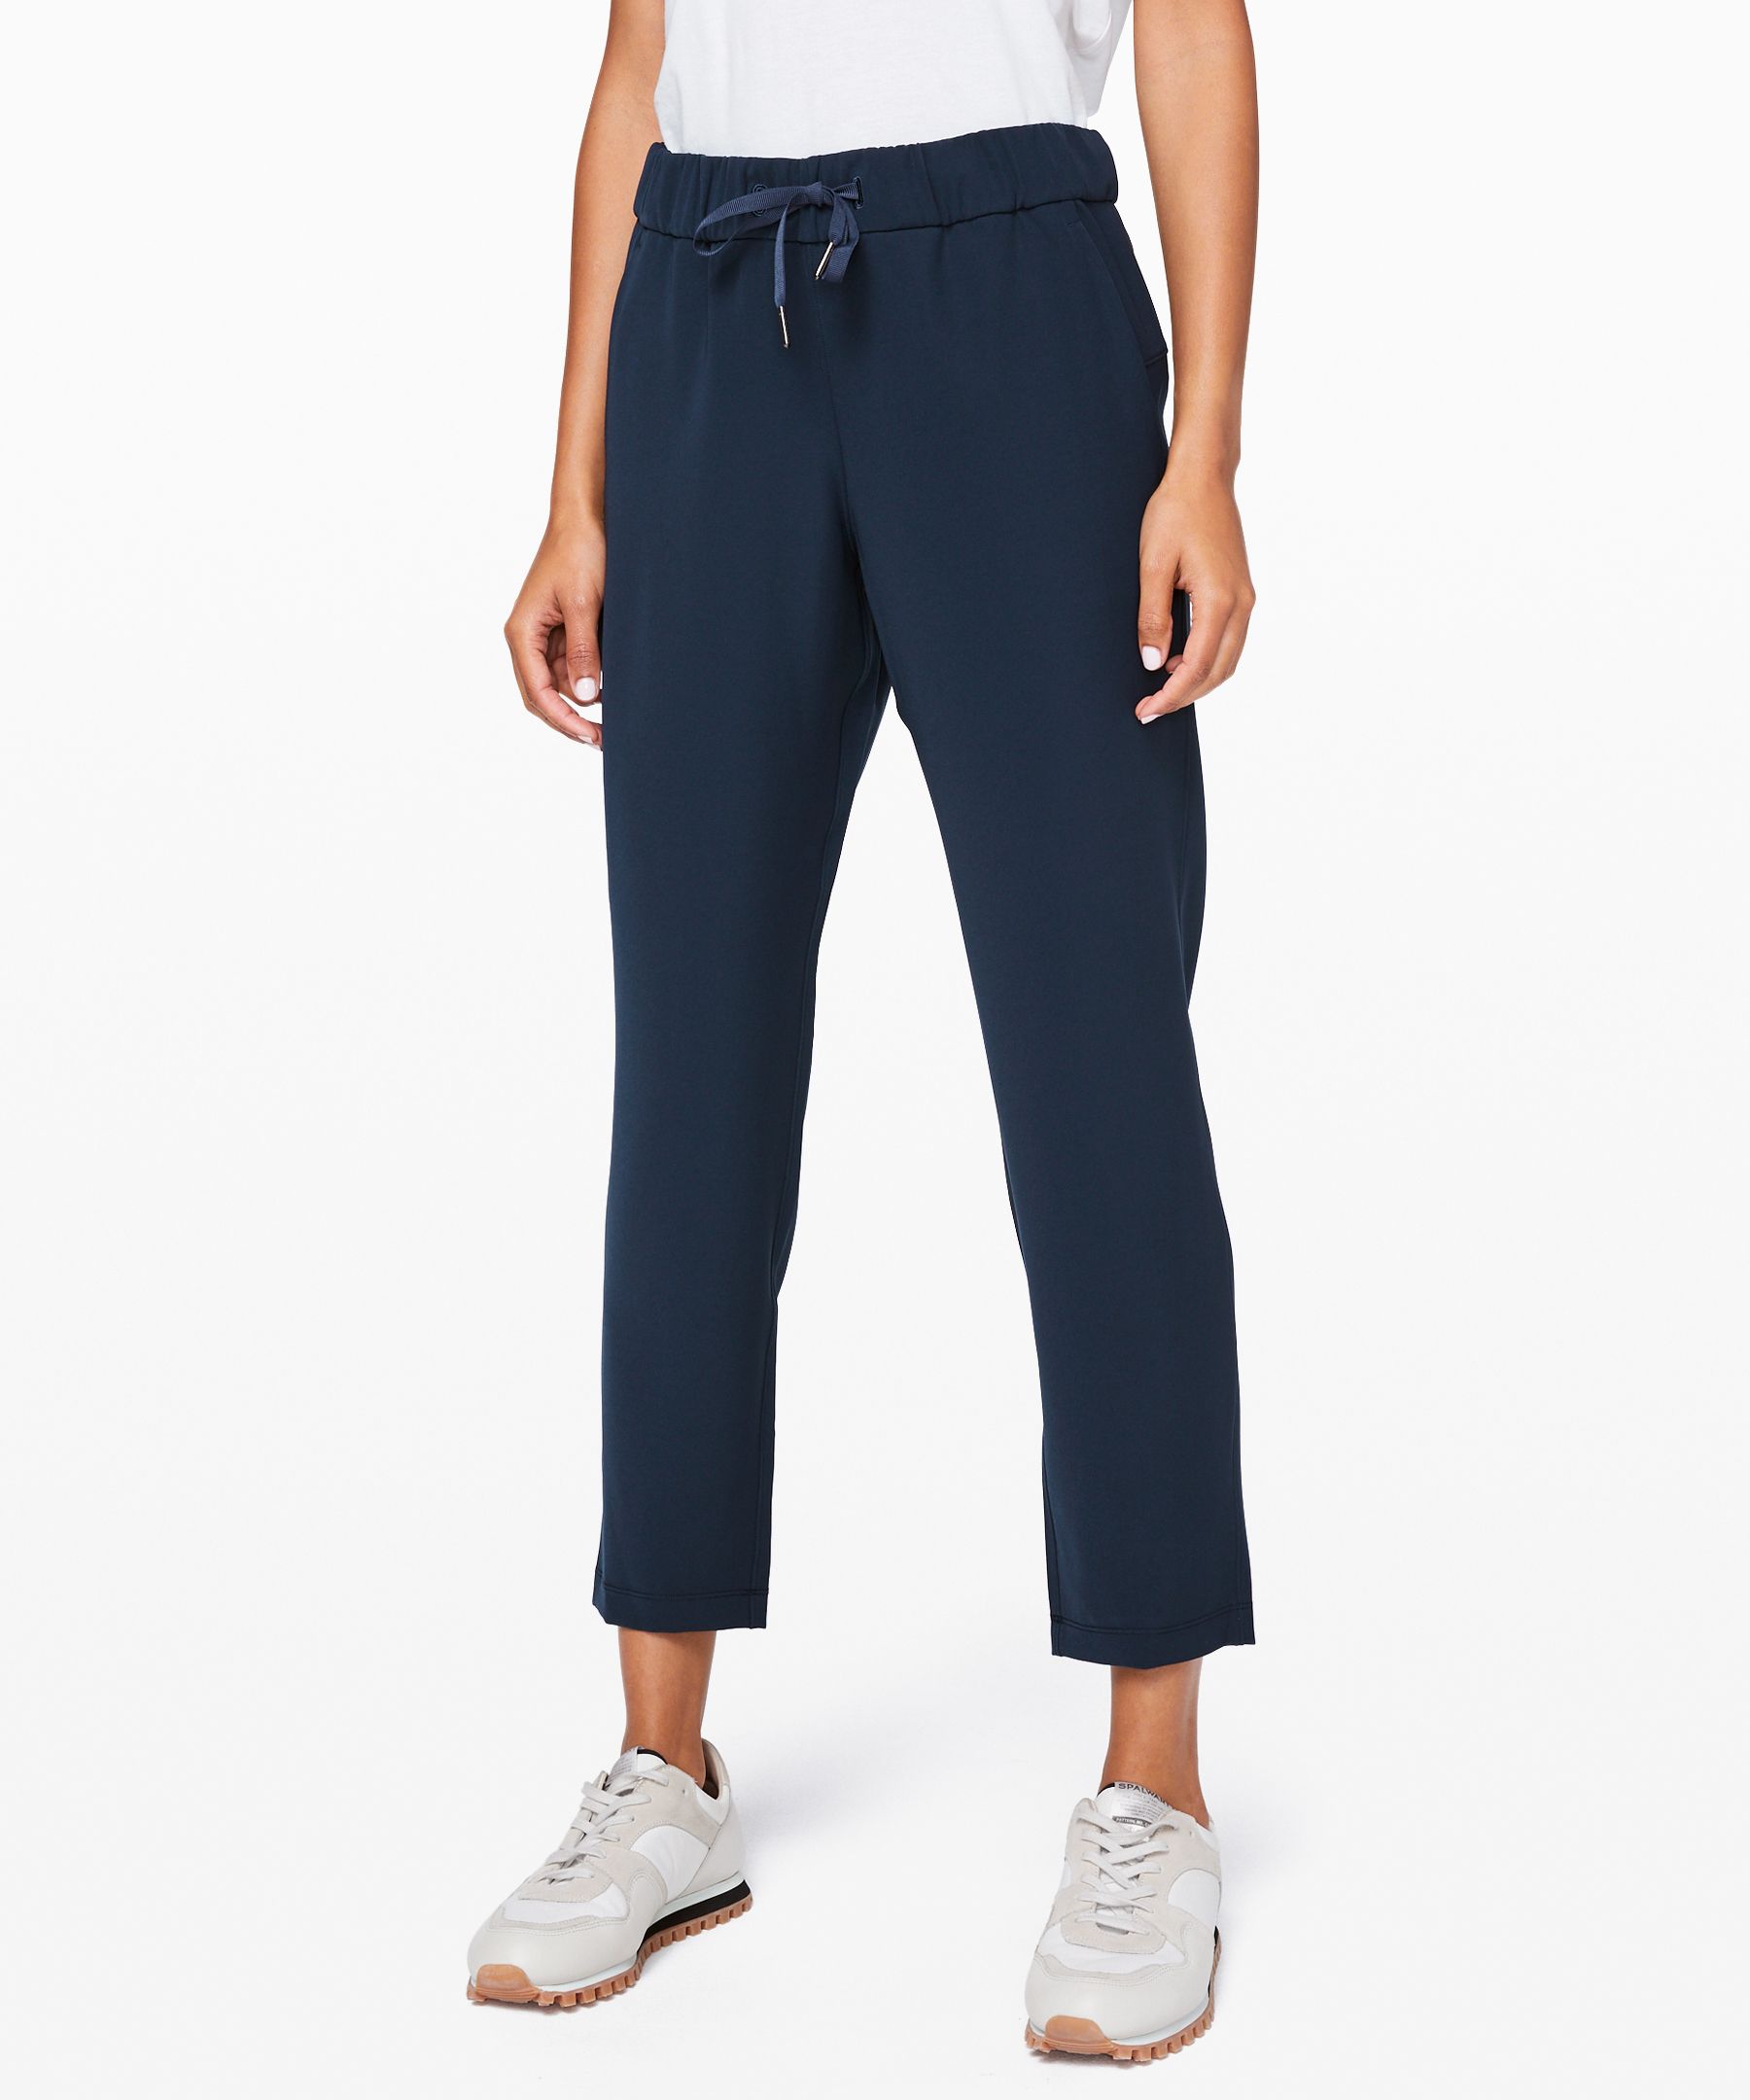 on the fly pants lululemon reviewed